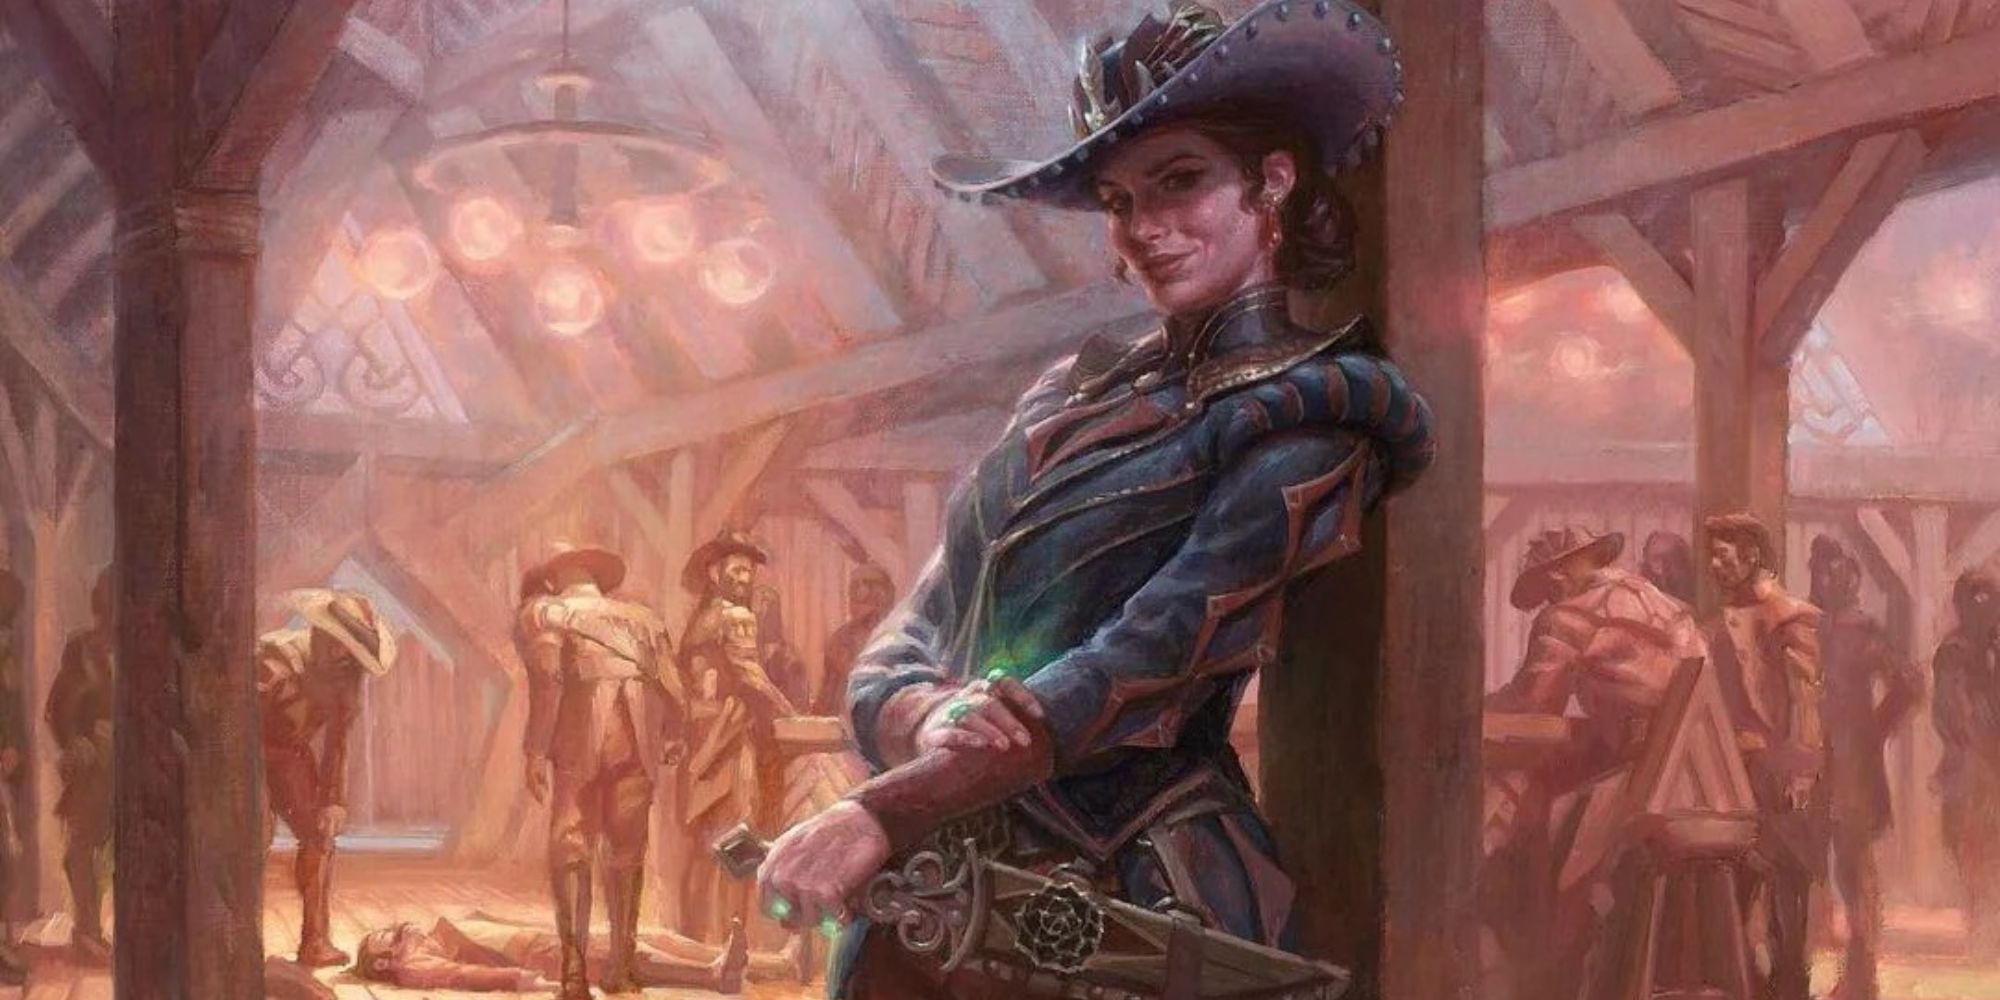 woman outlaw with ornate dagger standing in inn nearby murder scene